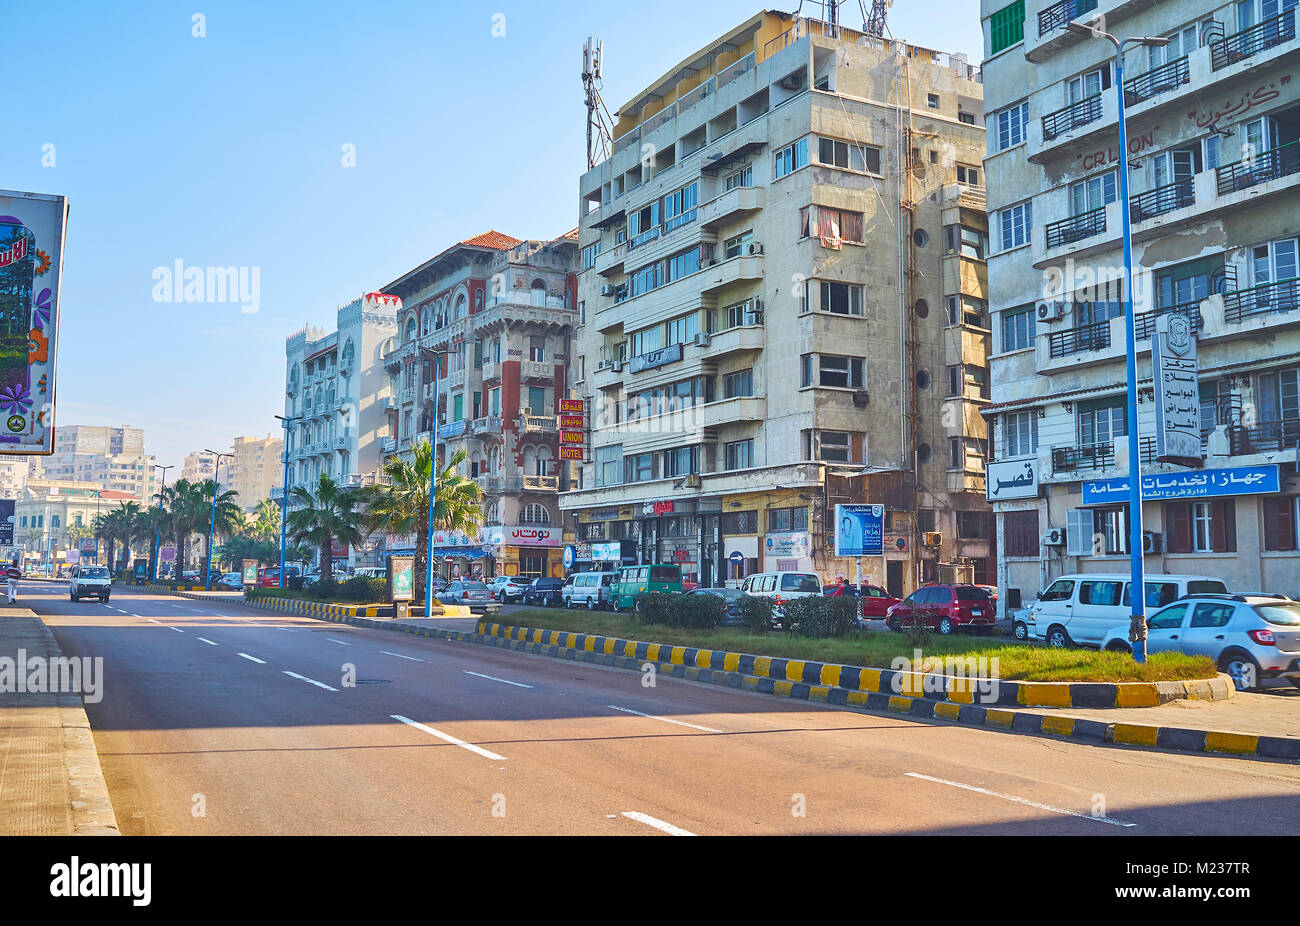 ALEXANDRIA, EGYPT - DECEMBER 17, 2017: The Corniche avenue is the central street of the city, stretching along the coast of Mediterranean sea and cont Stock Photo